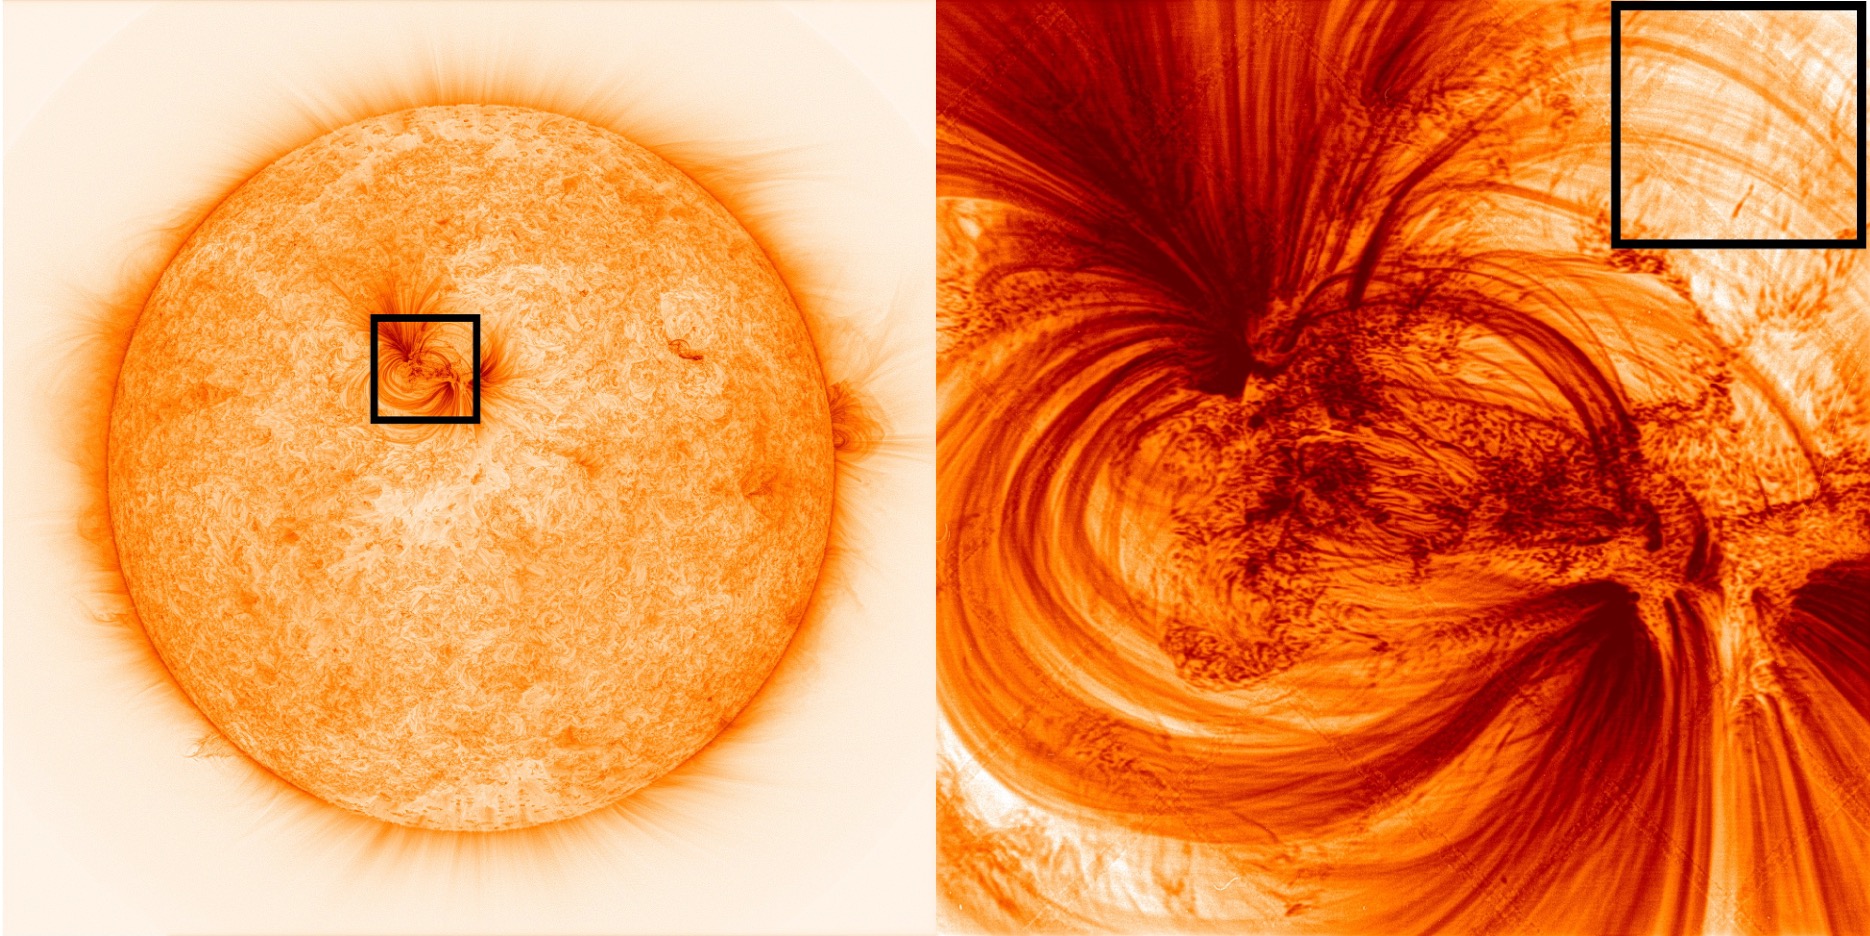 Images of the Sun's corona captured by the Hi-C sounding rocket